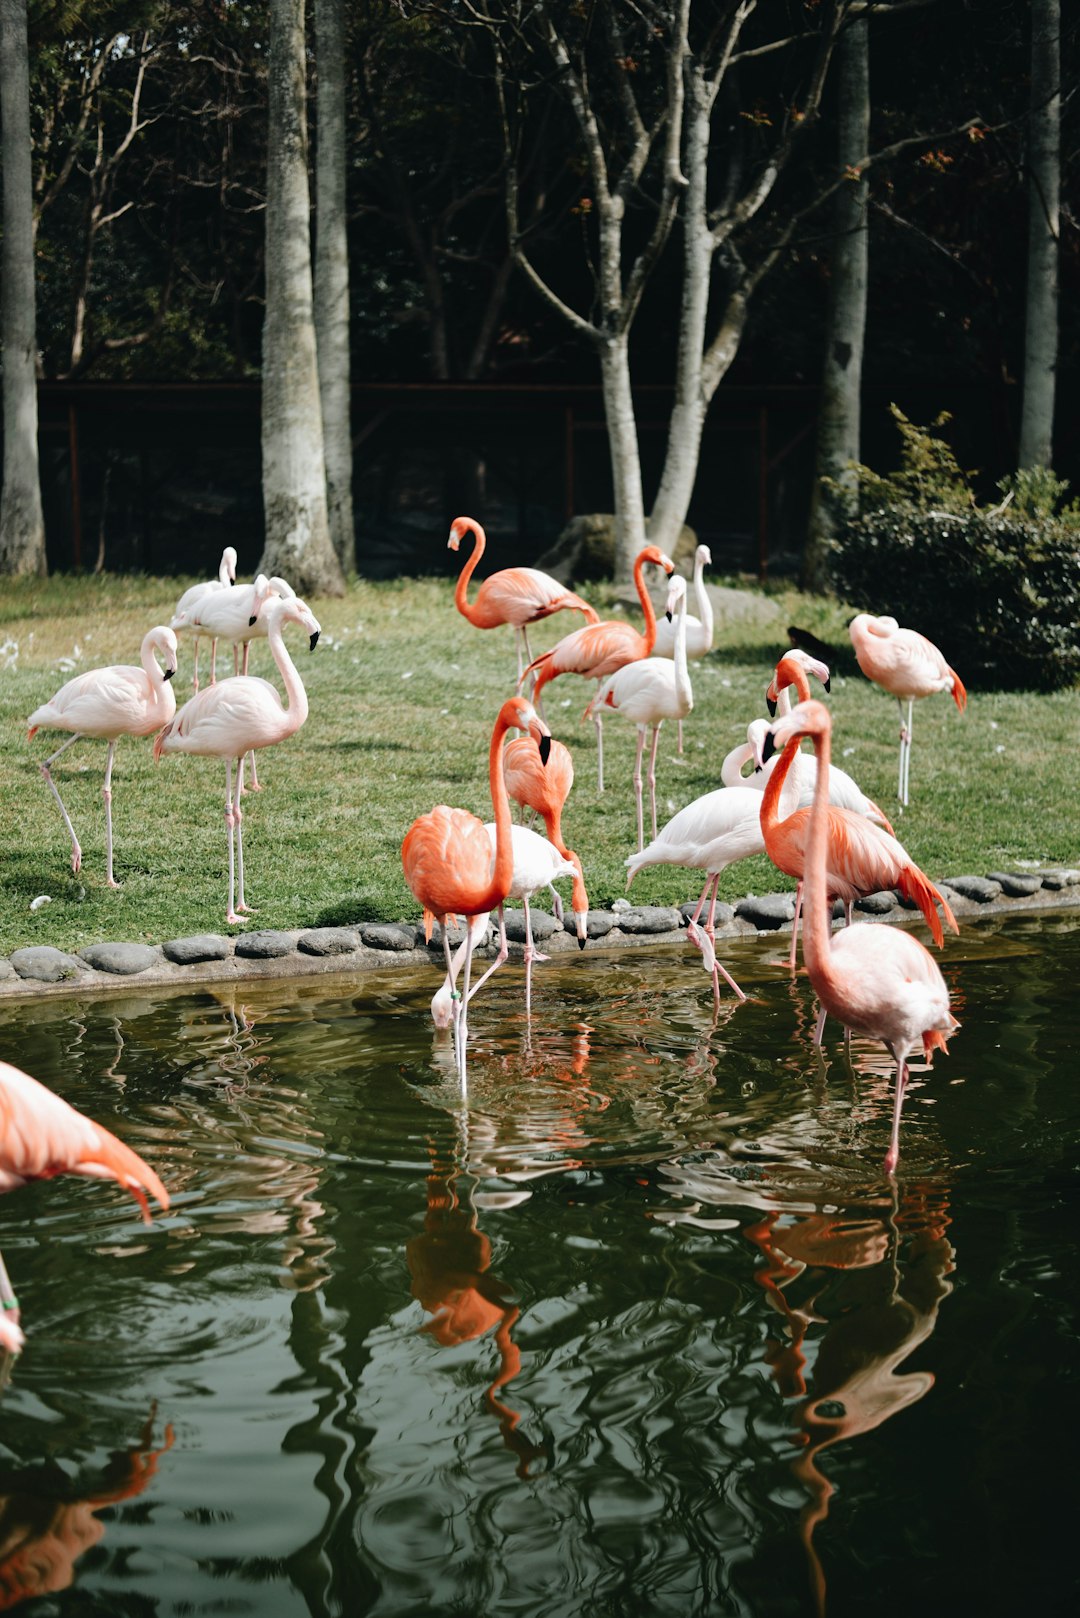 A group of flamingos stood in the zoo, with pink and white feathers standing on one leg near water or grassland, in an outdoor environment with trees and green lawns. The photography was in the style of a wideangle lens perspective, with natural light and bright colors, showing the flamingos’ playful movements.